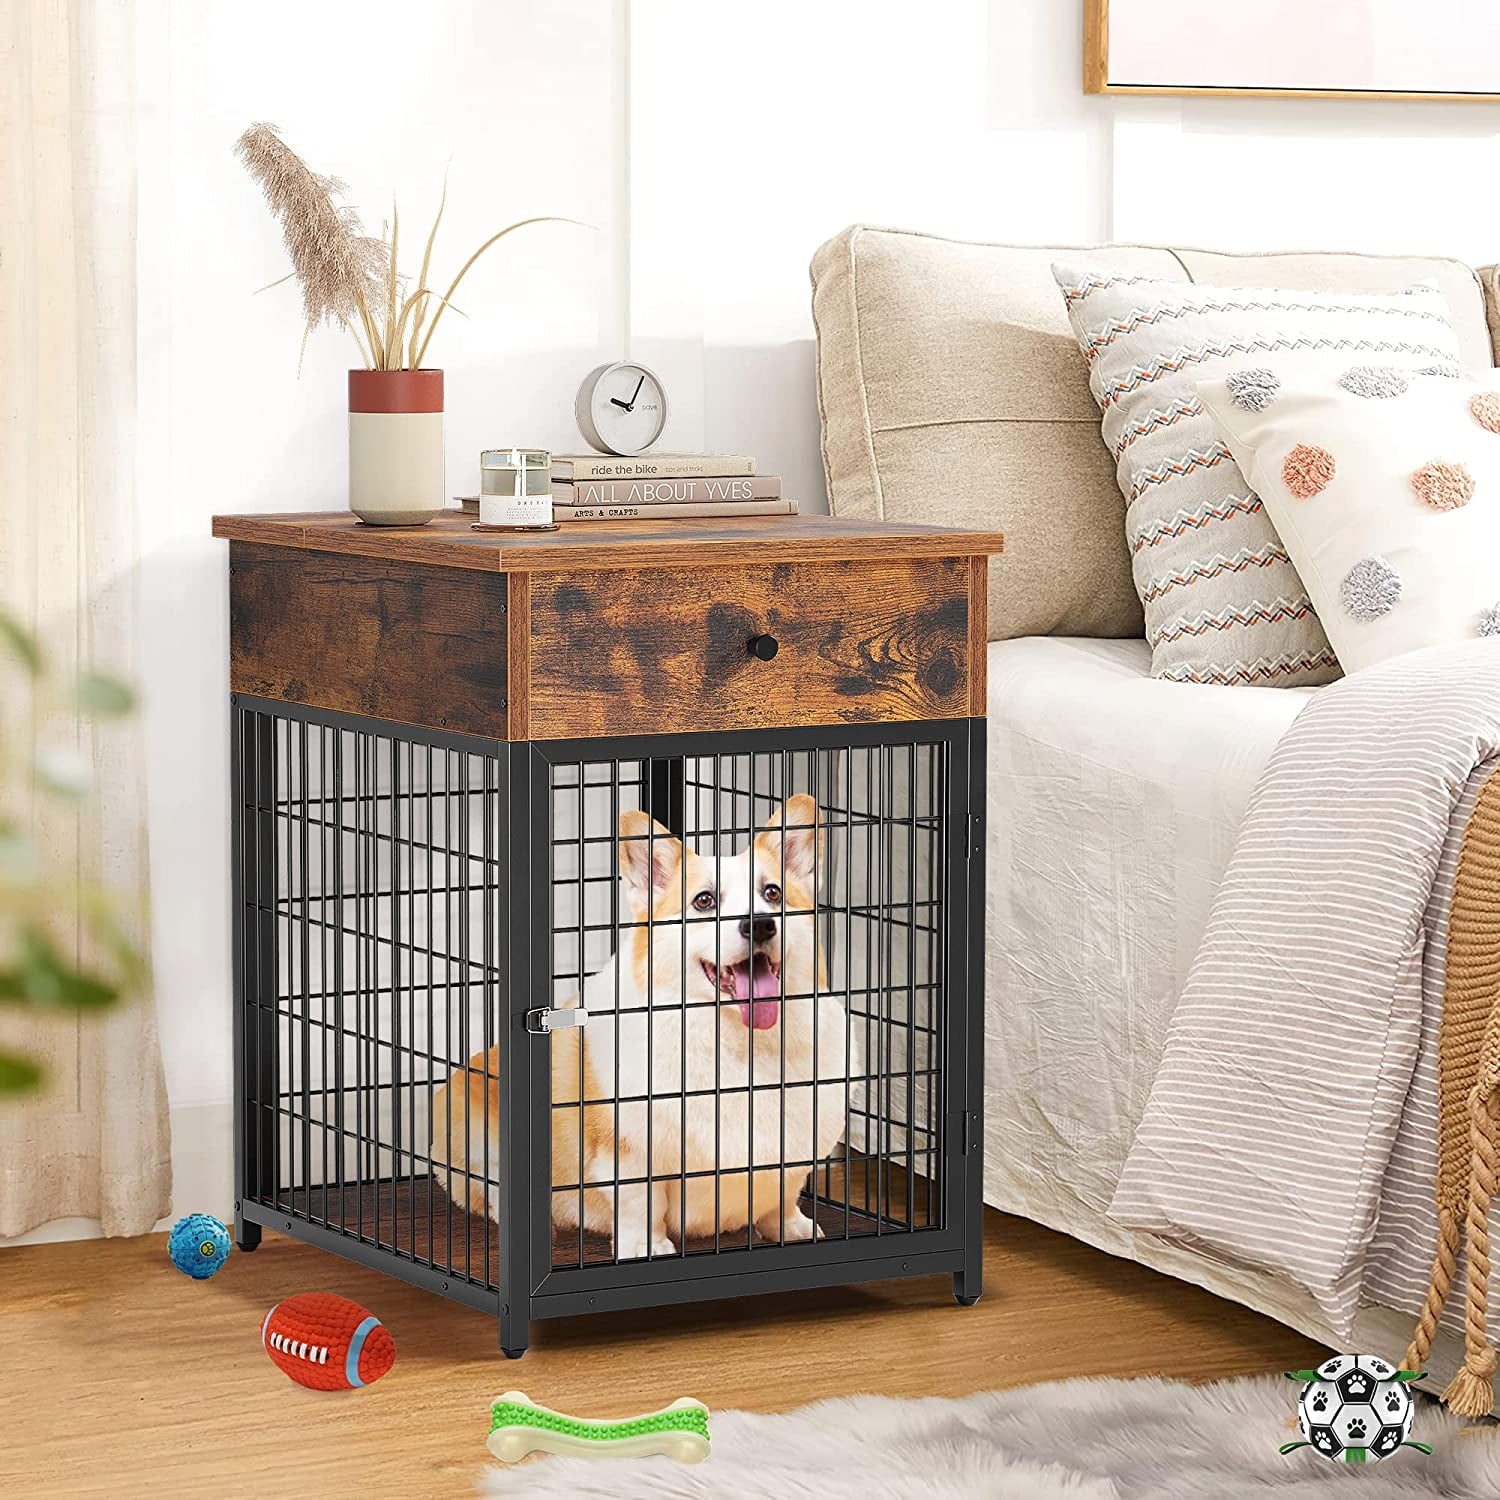 Includes Modhaus Living Pen Contemporary End Table Pet Crate and Kennel with Stainless Steel Spindles Medium, Gray 